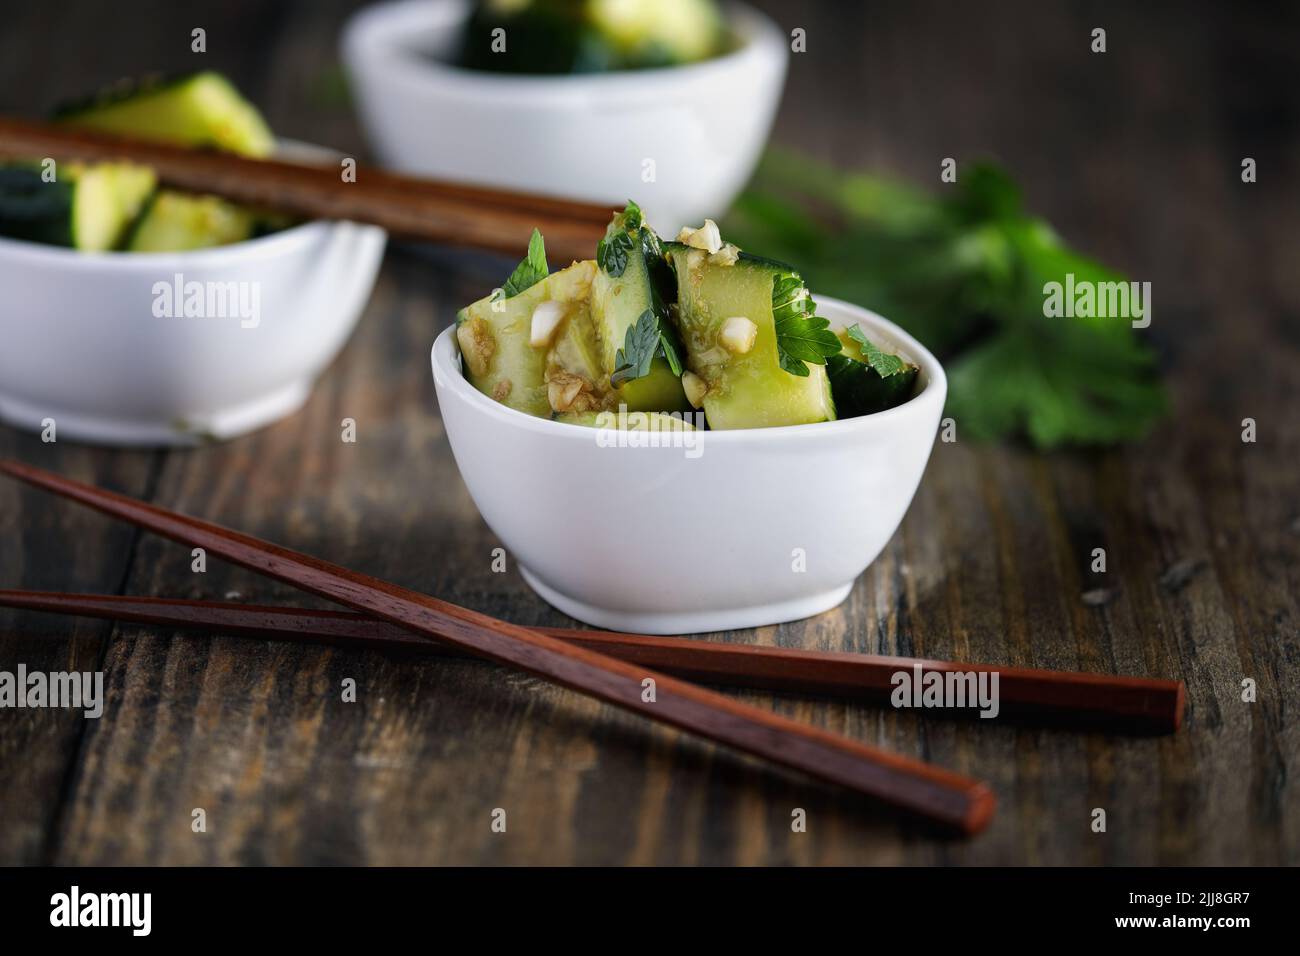 Chilled Pai Huang Gua, Chinese Smashed Cucumber Salad. Made with garlic, ginger, sesame oil, soy sauce and garnished with fresh cilantro leaves. Extre Stock Photo